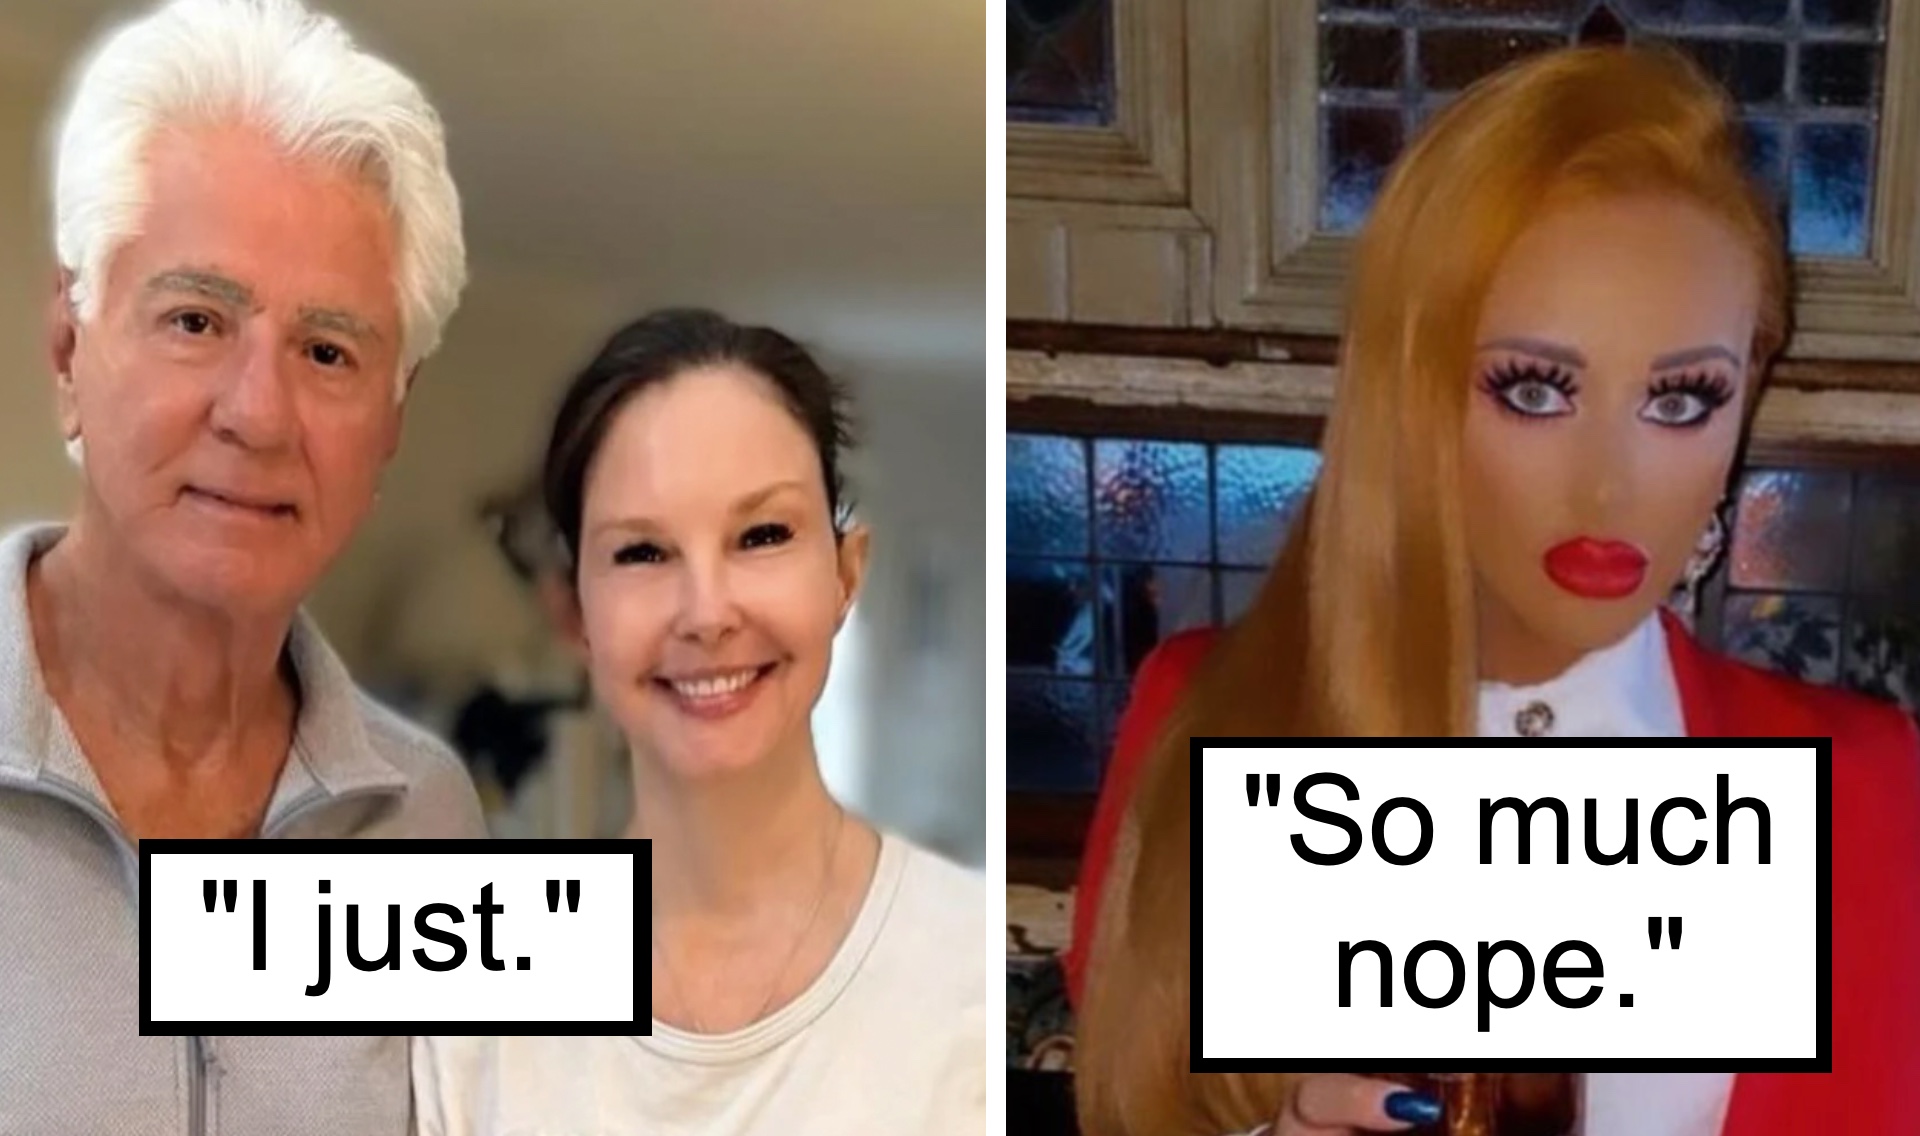 The image is split into two sections. The left section shows a man with white hair and a woman with dark hair smiling, with the caption "I just." The right section shows a woman with heavy makeup and bright red lipstick, with the caption "So much nope.